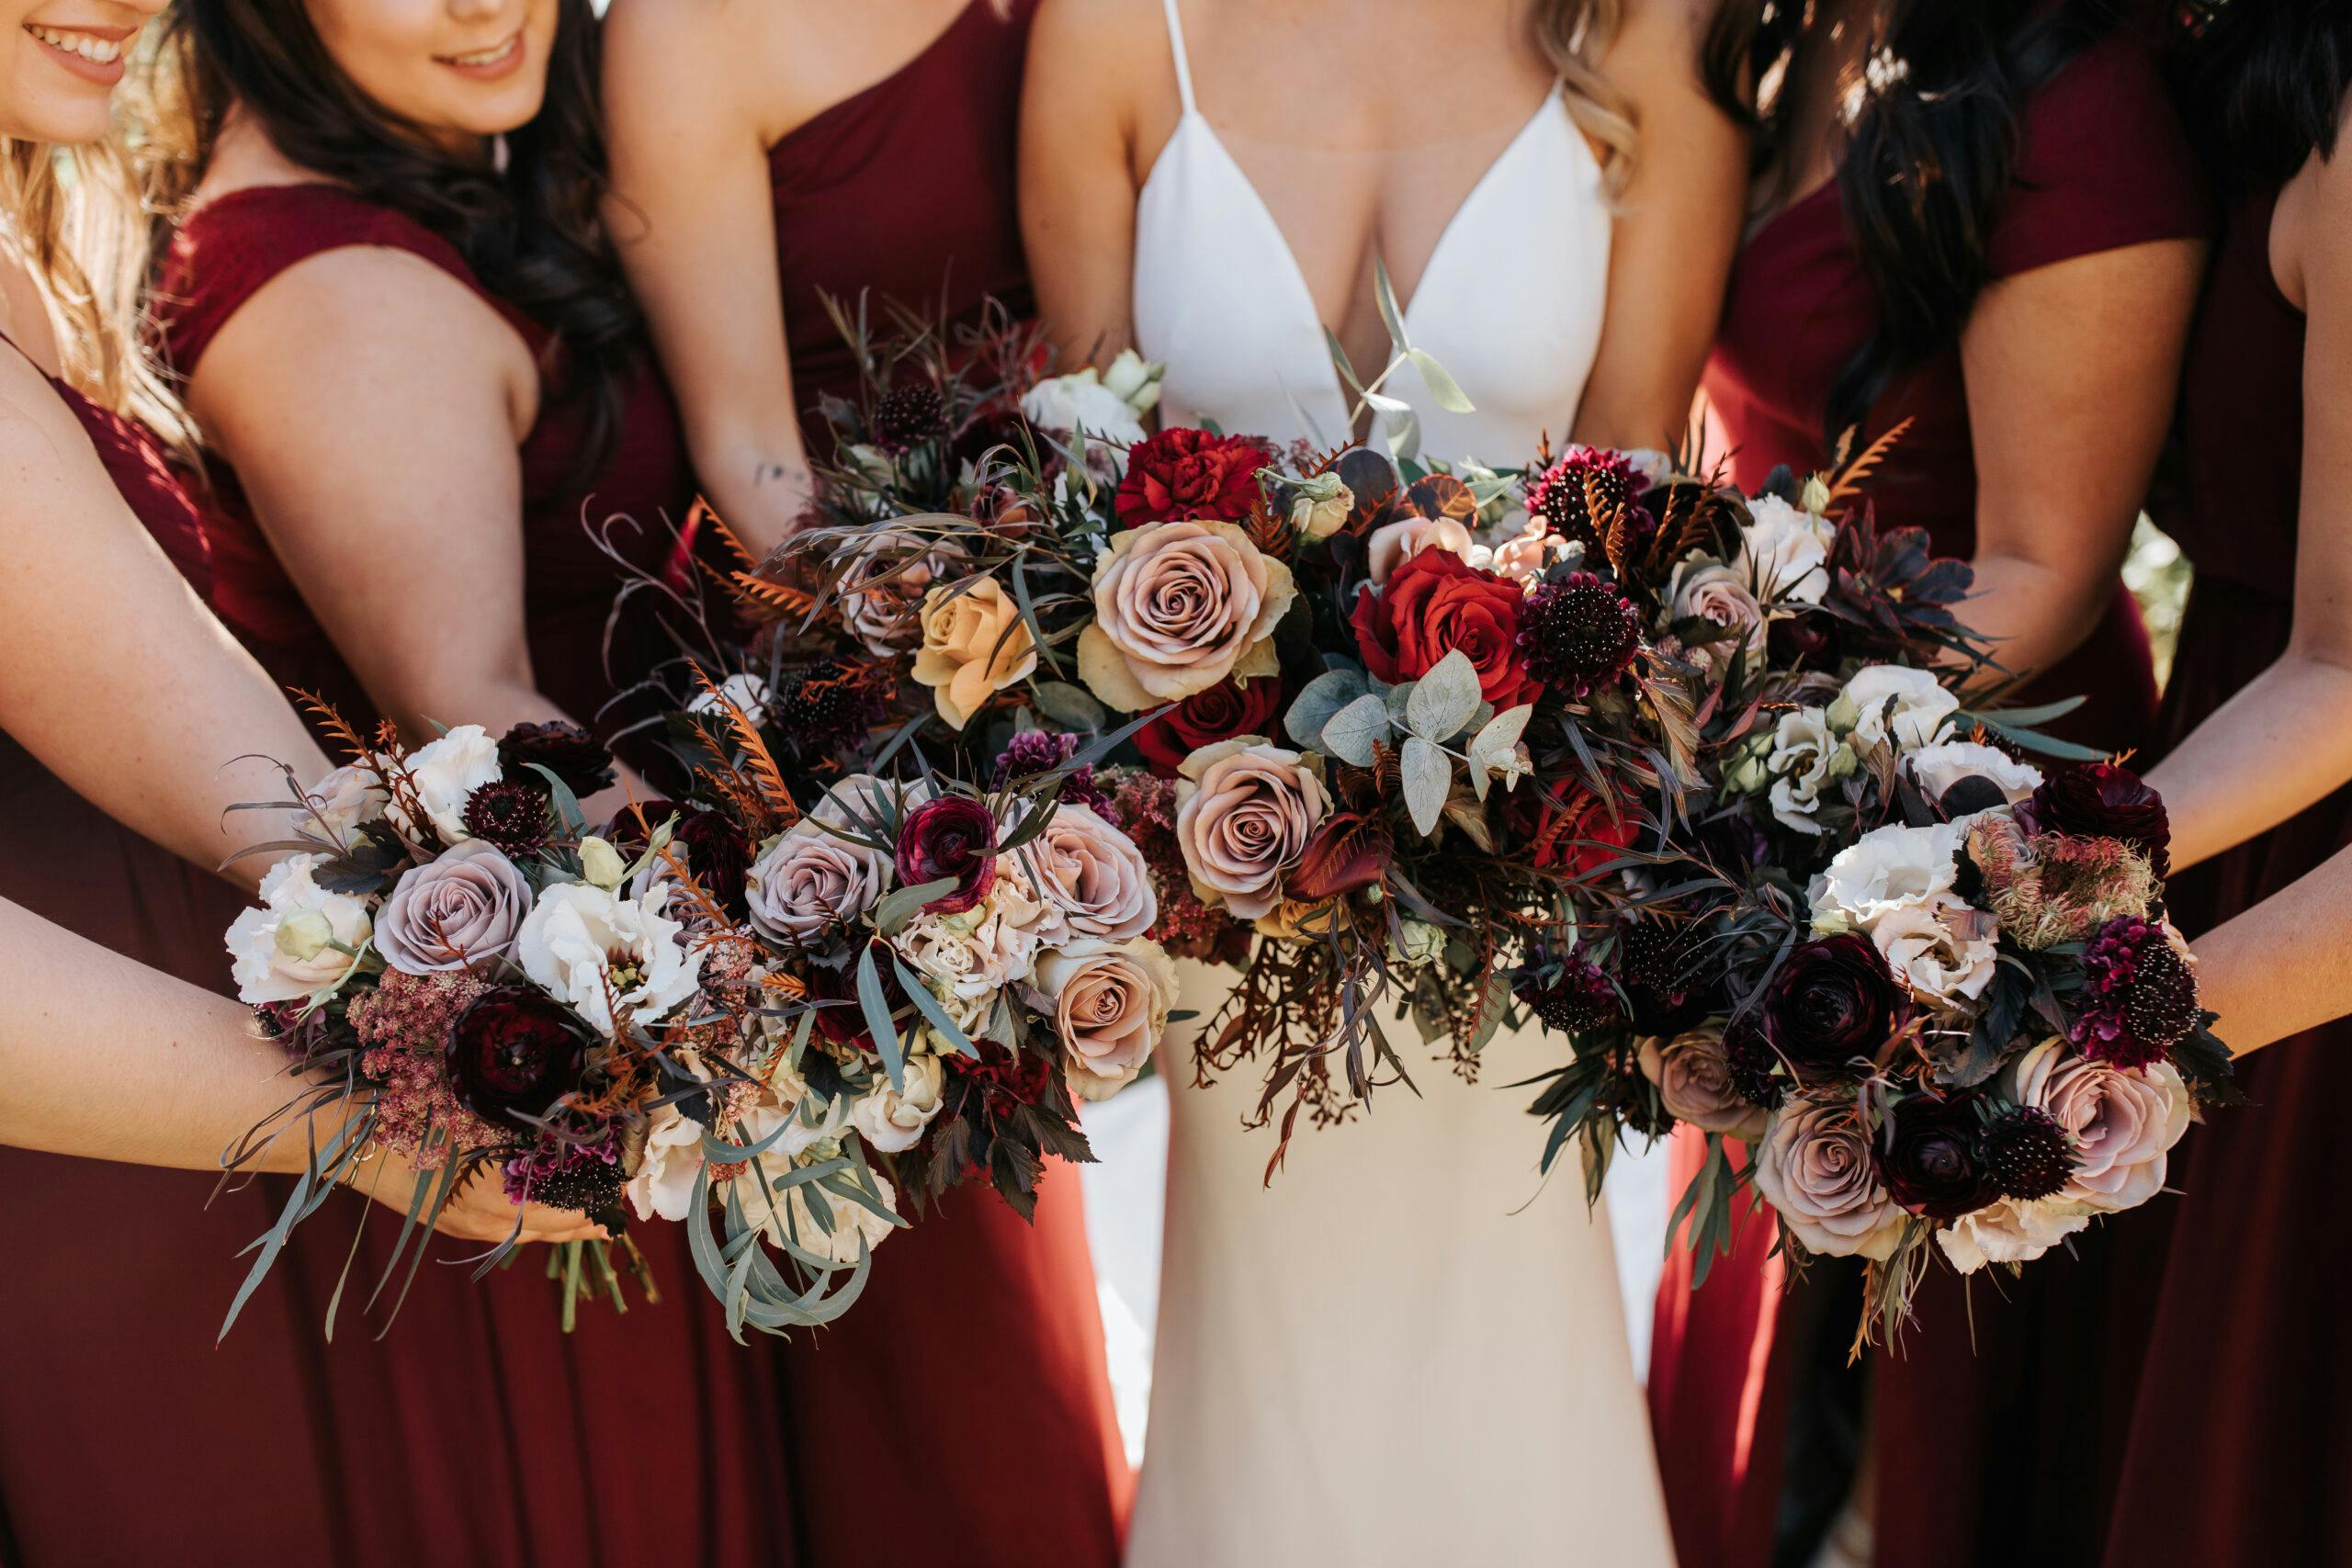 Color Combinations You'll “Fall in Love” With for a Fall Wedding